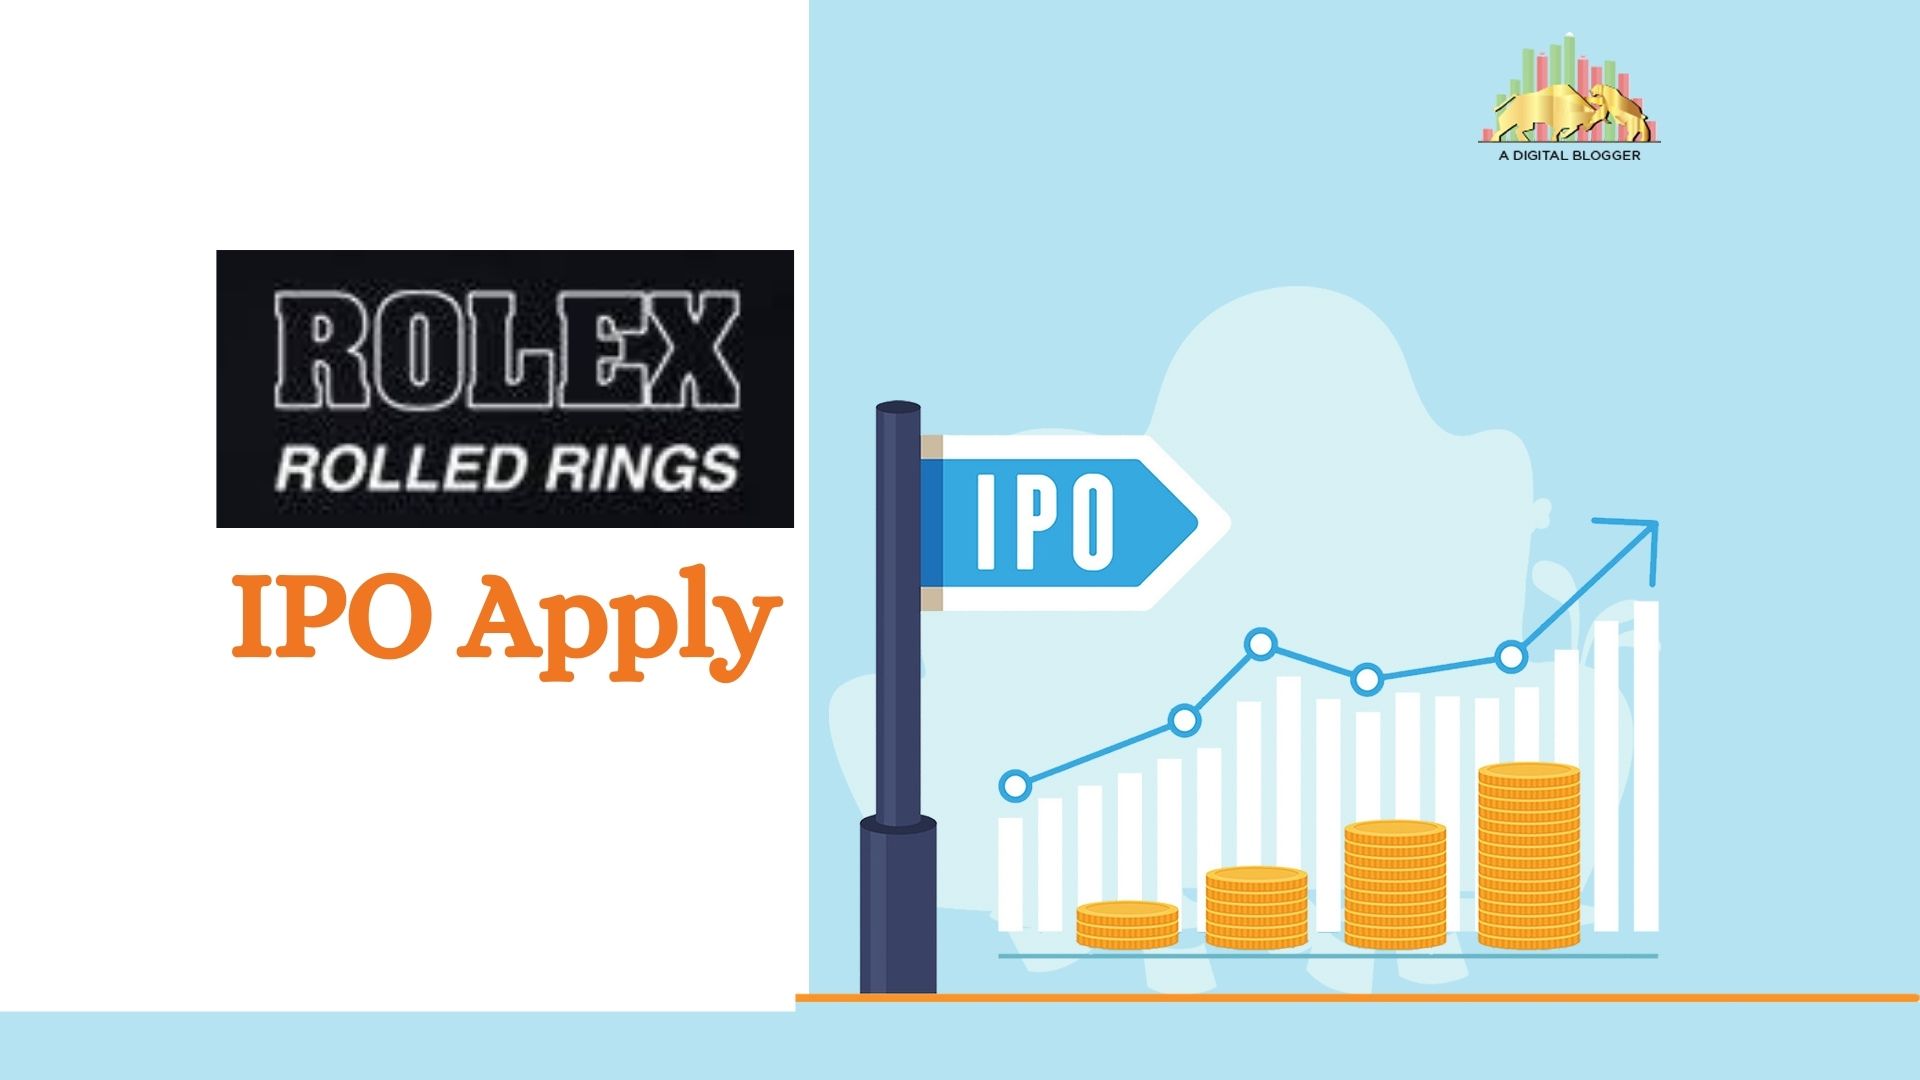 Rolex Rings IPO: Rolex Rings raises Rs 219 crore from anchor investors  ahead of IPO - The Economic Times